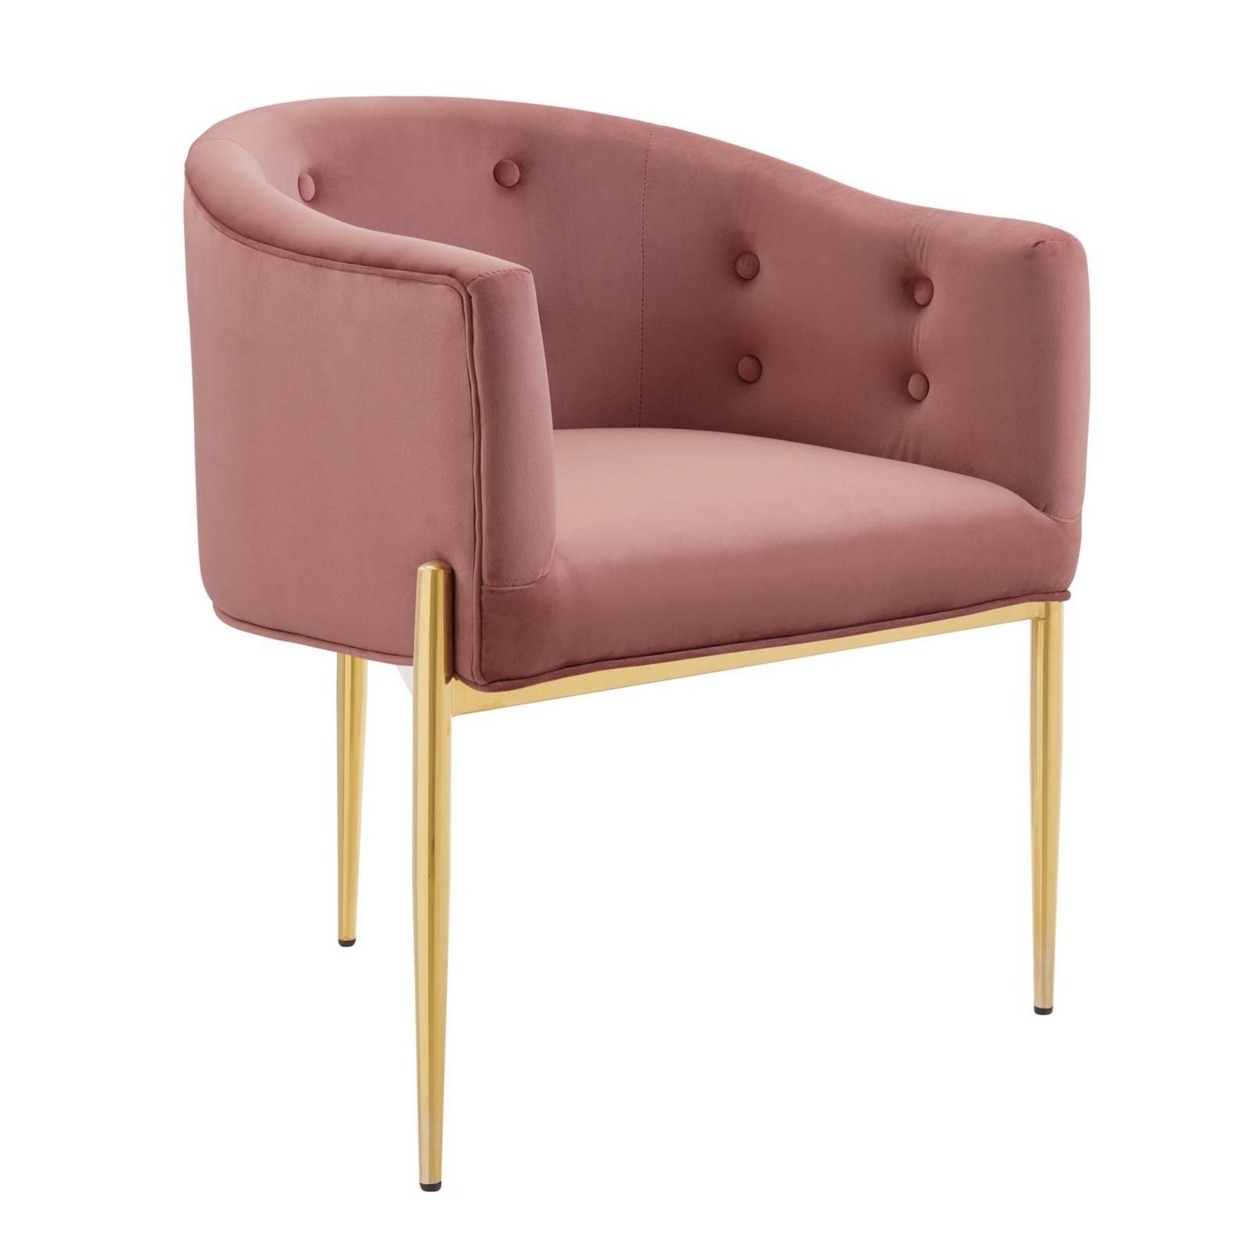 Savour Tufted Performance Velvet Accent Chair, Dusty Rose